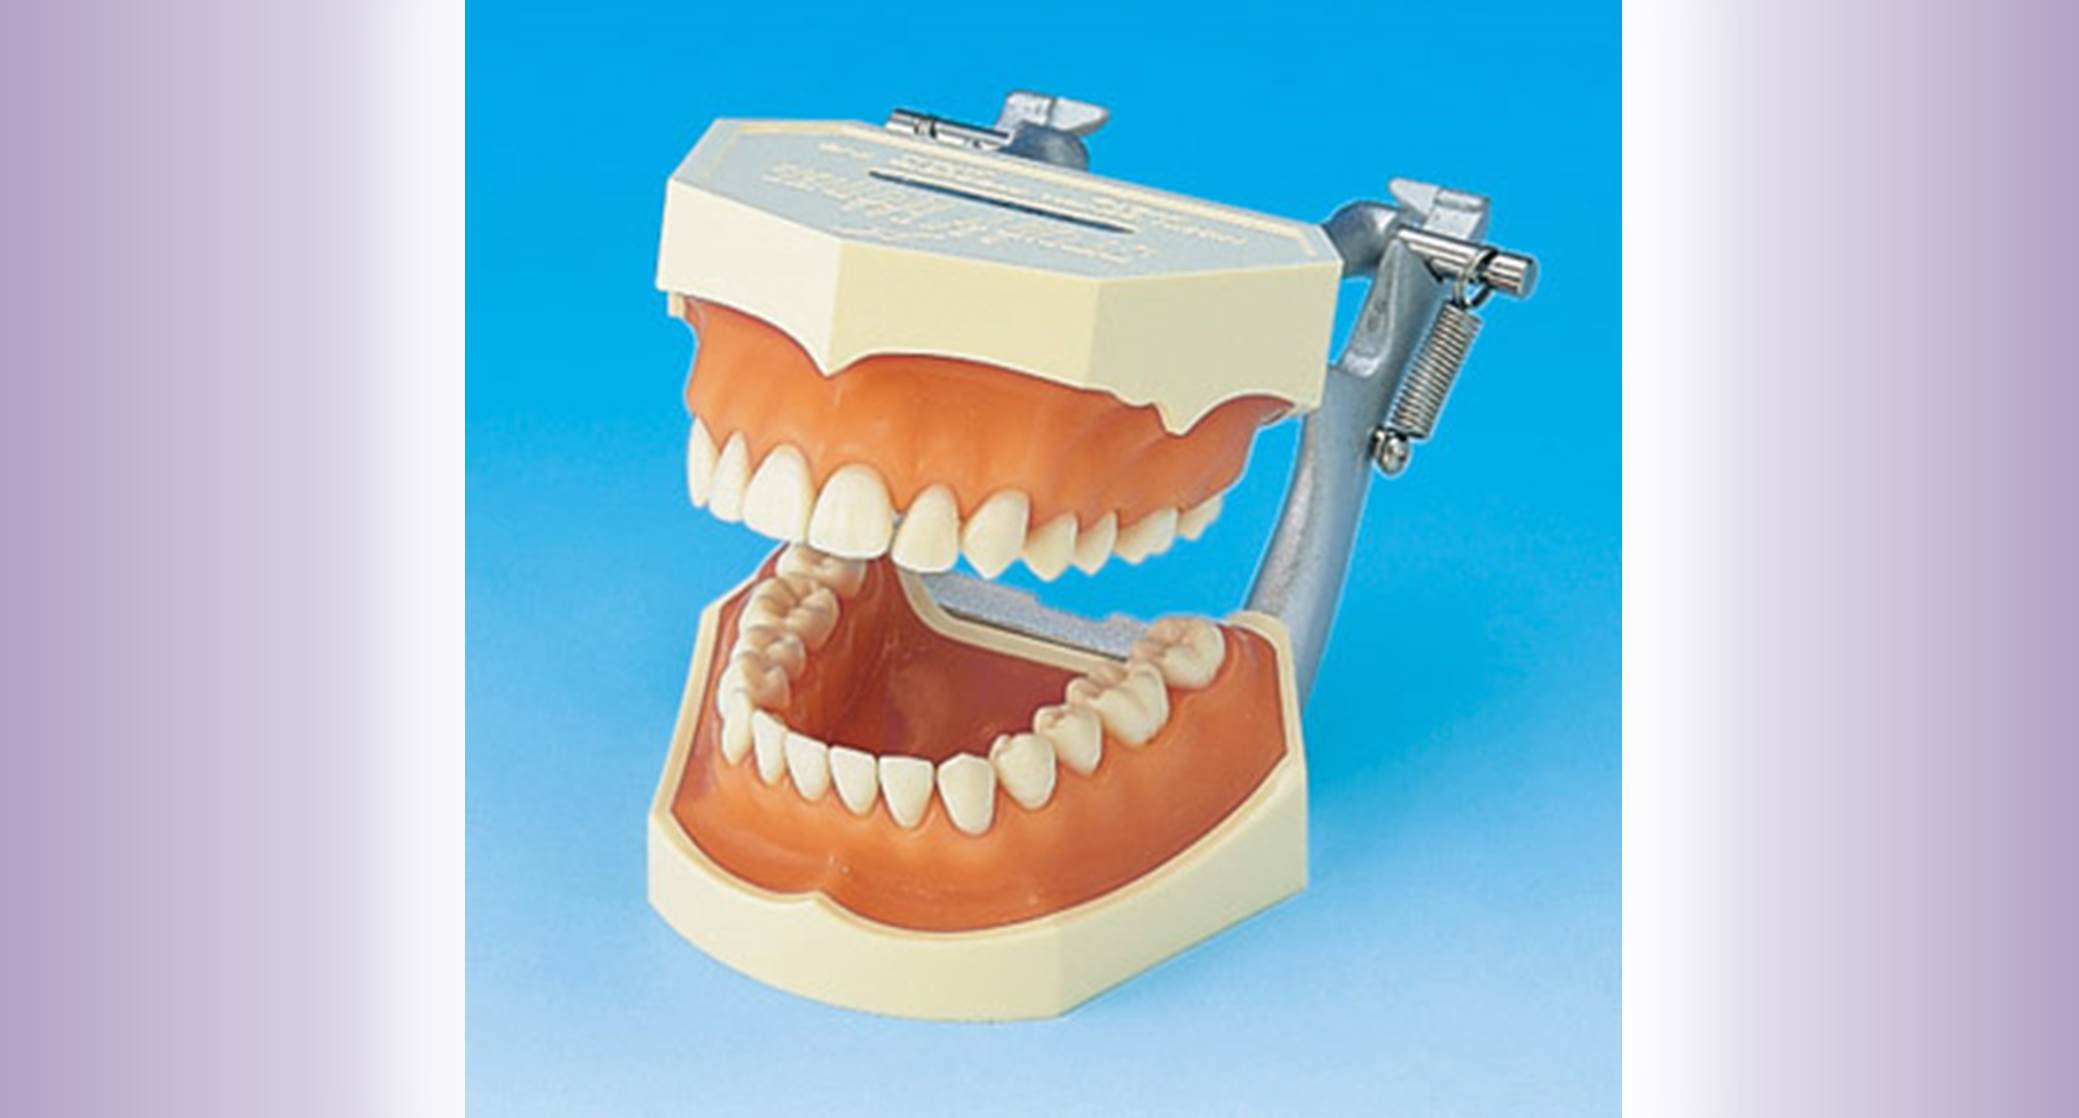 Tooth Anatomy Patient Education Models